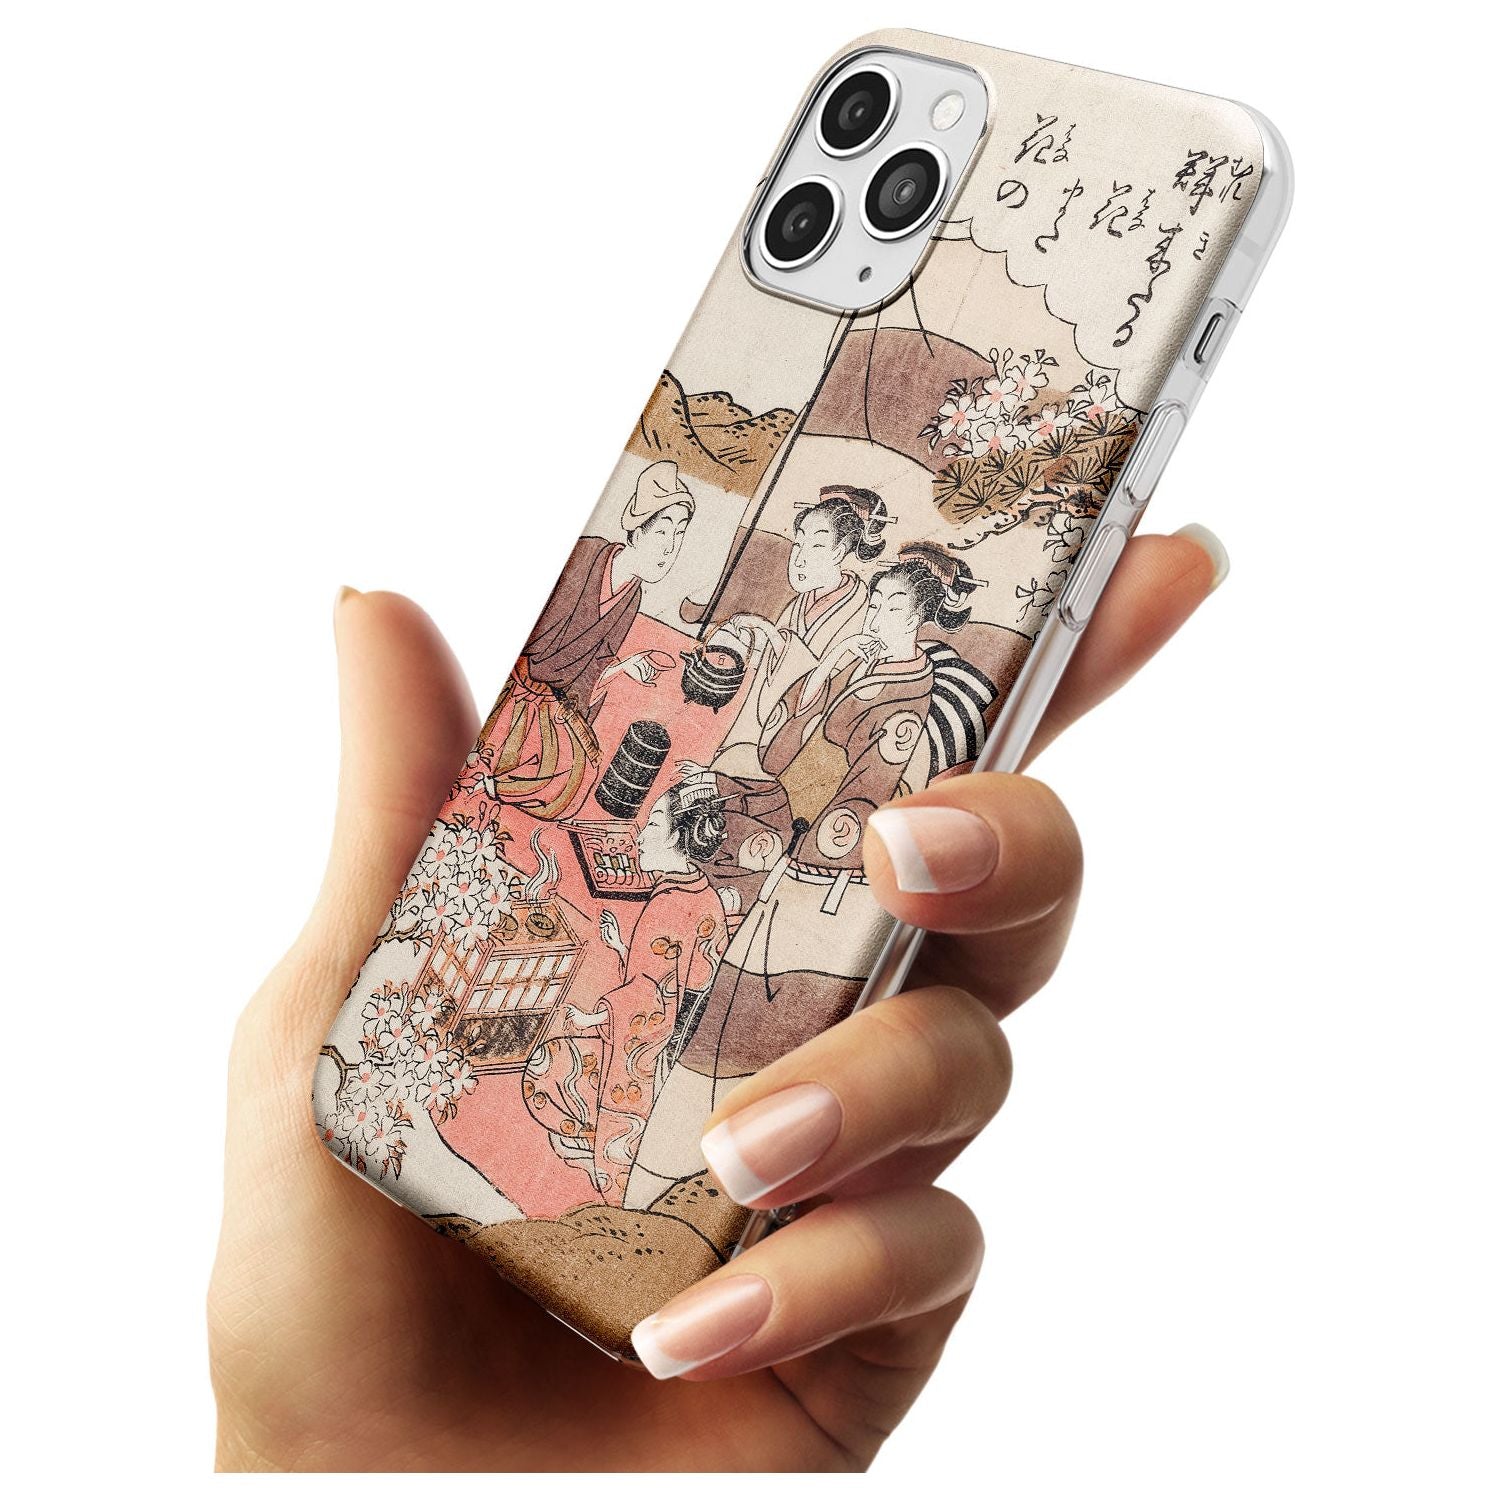 Japanese Afternoon Tea Slim TPU Phone Case for iPhone 11 Pro Max